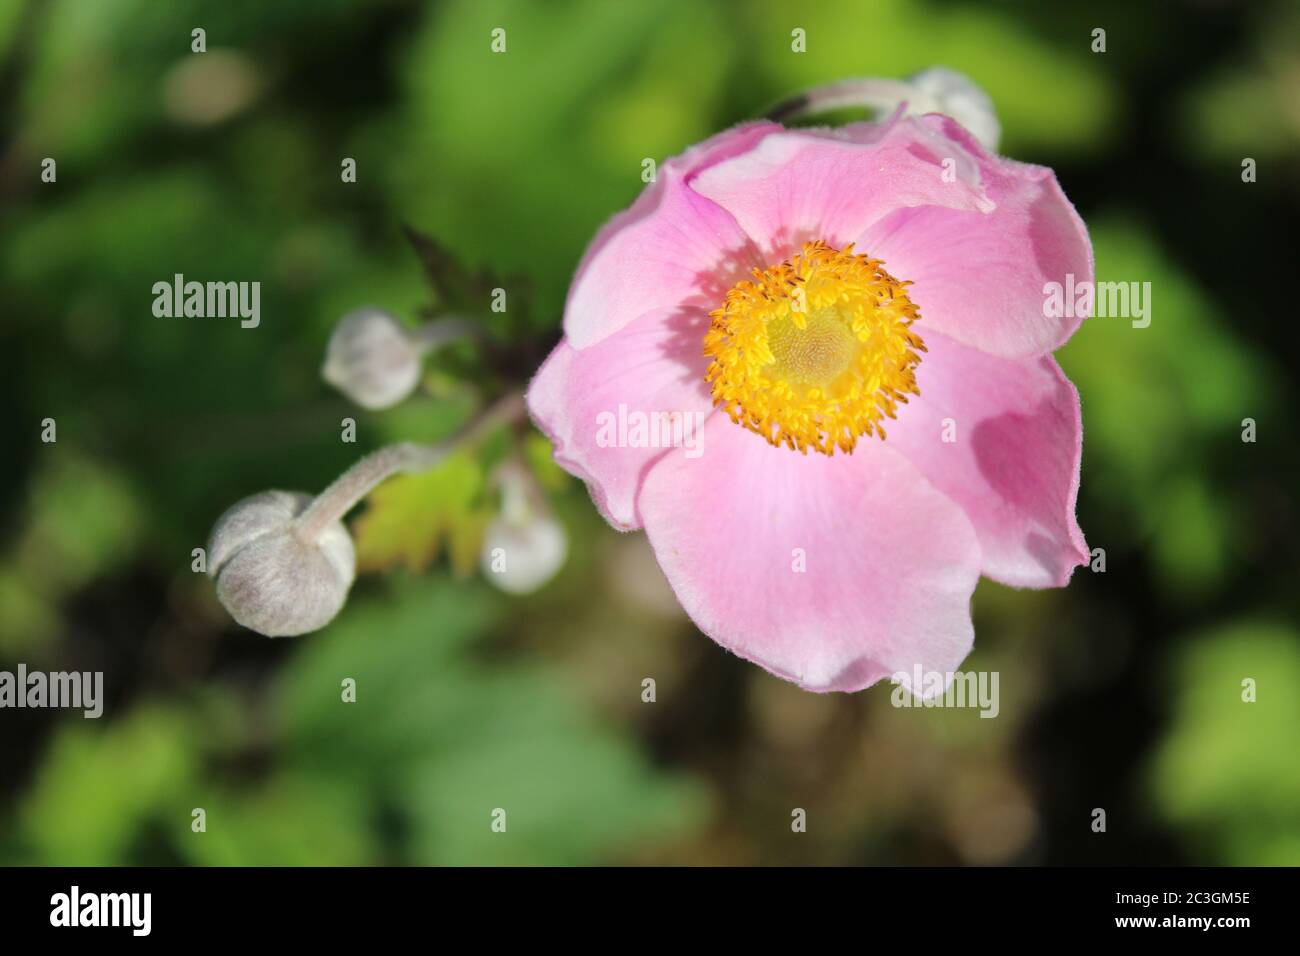 Closeup shot of a Japanese anemone with blurred background Stock Photo